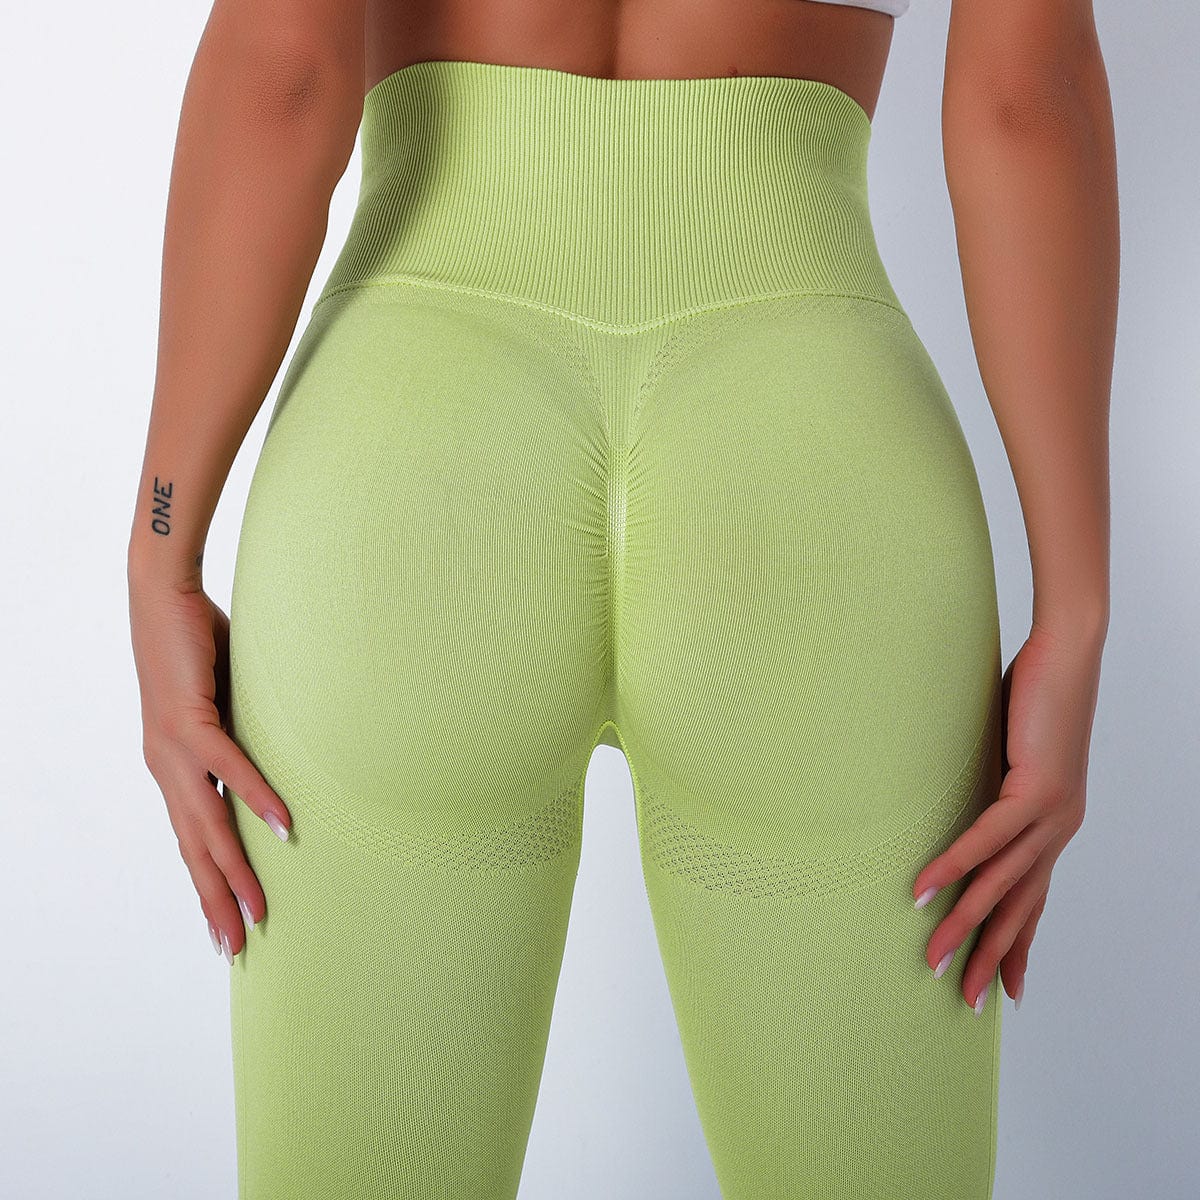 Zoom in view of Butt Sculpting High Rise Leggings-lime green